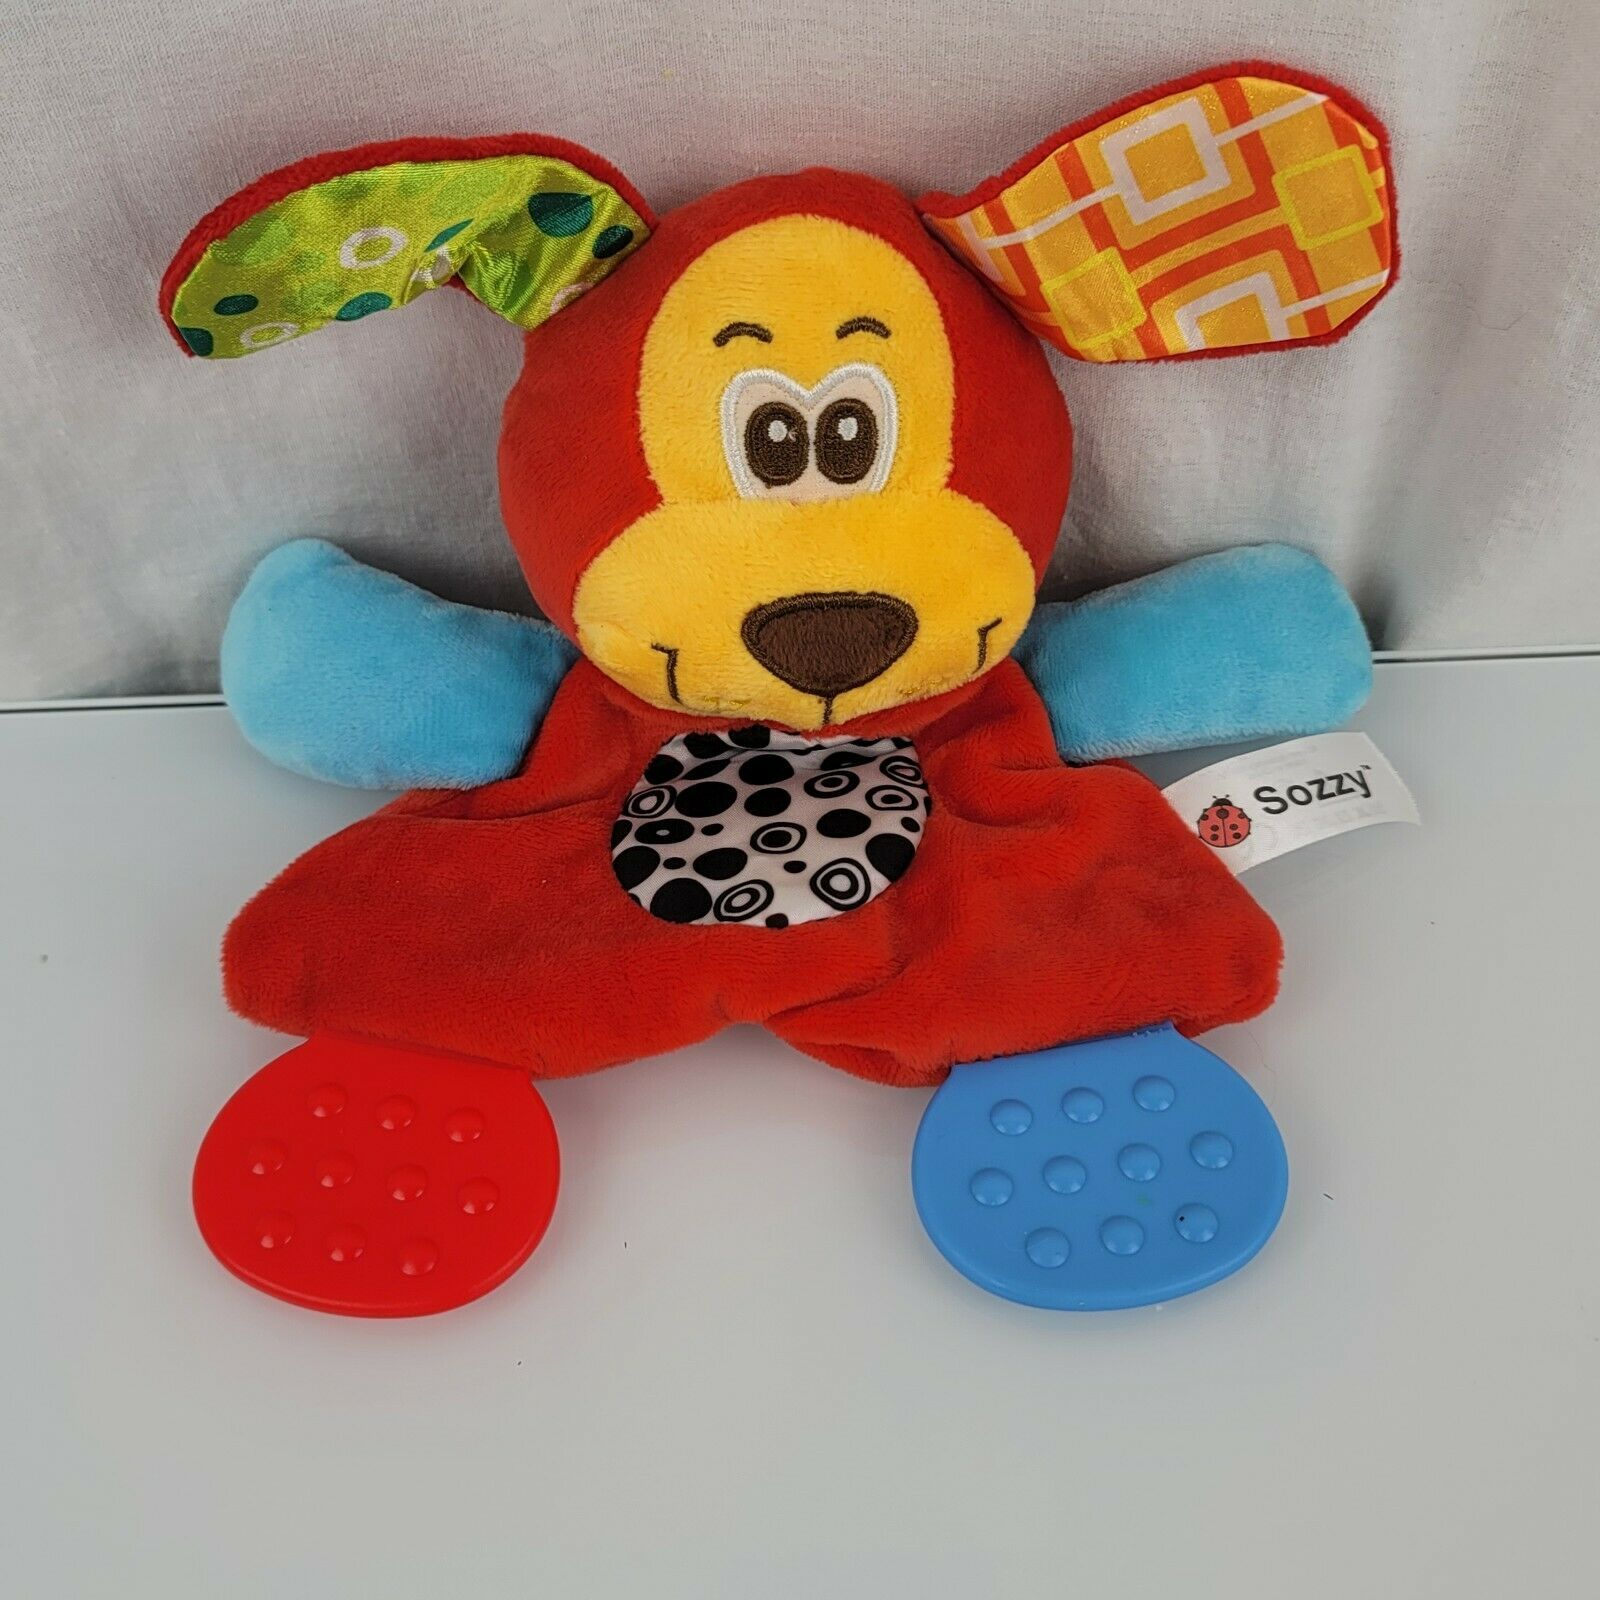 Sassy Sozzy Playgro Red Dog Teether Security Blanket Crinkle Lovey Baby Toy NEW - $19.79